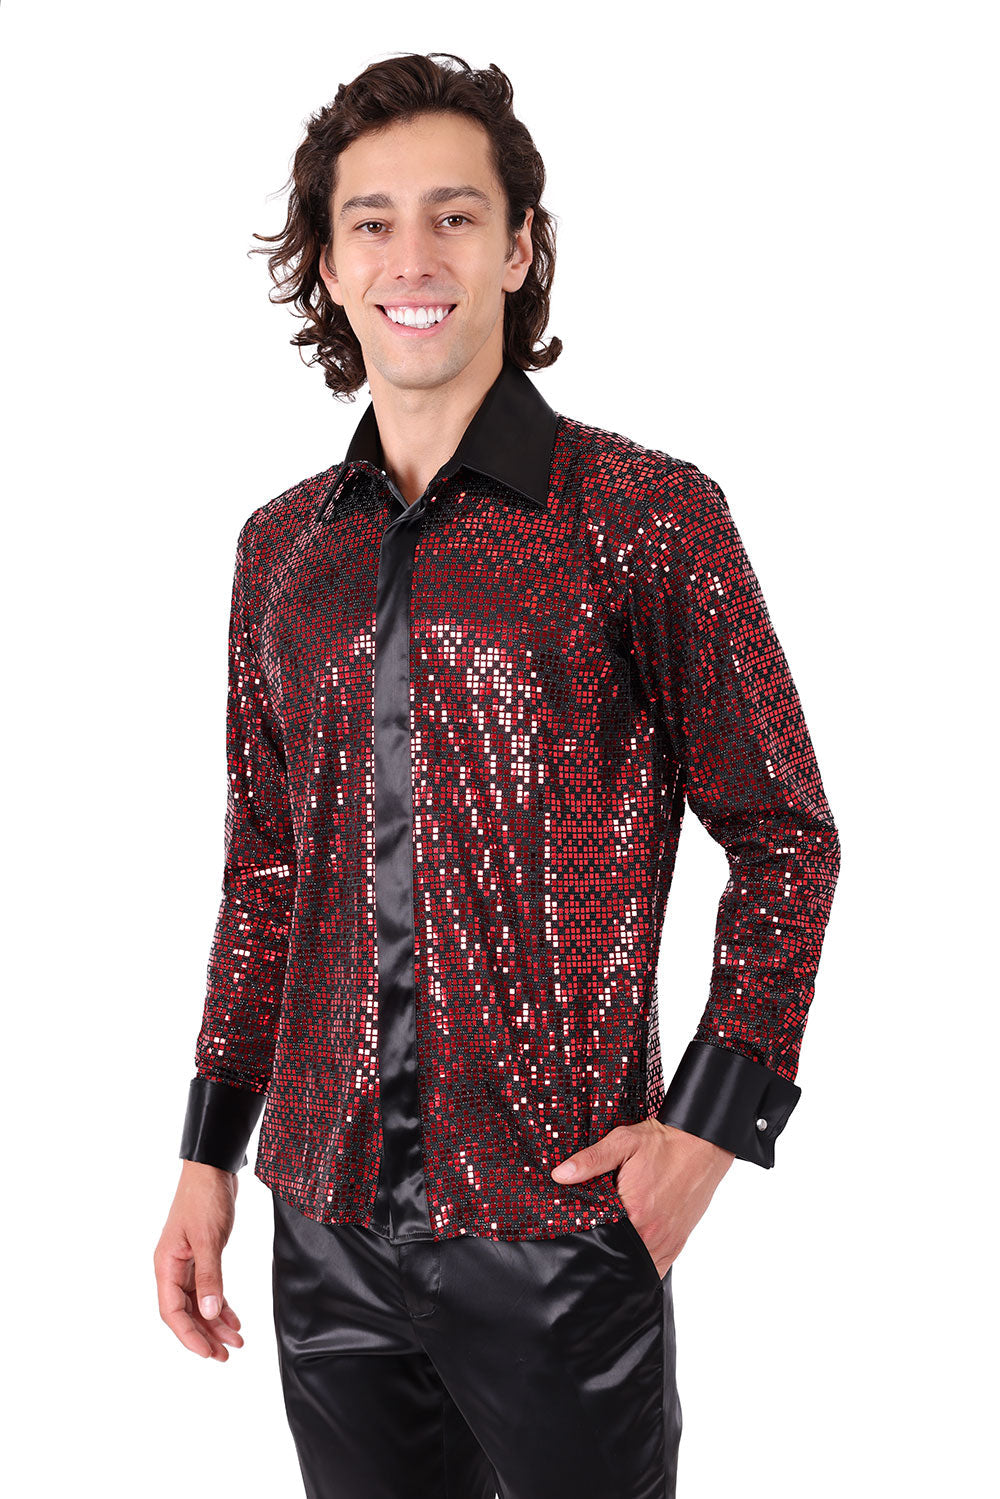 Barabas Men's French Cuff Glittery Sparkly Striped Shirt 2FCS1006  Red